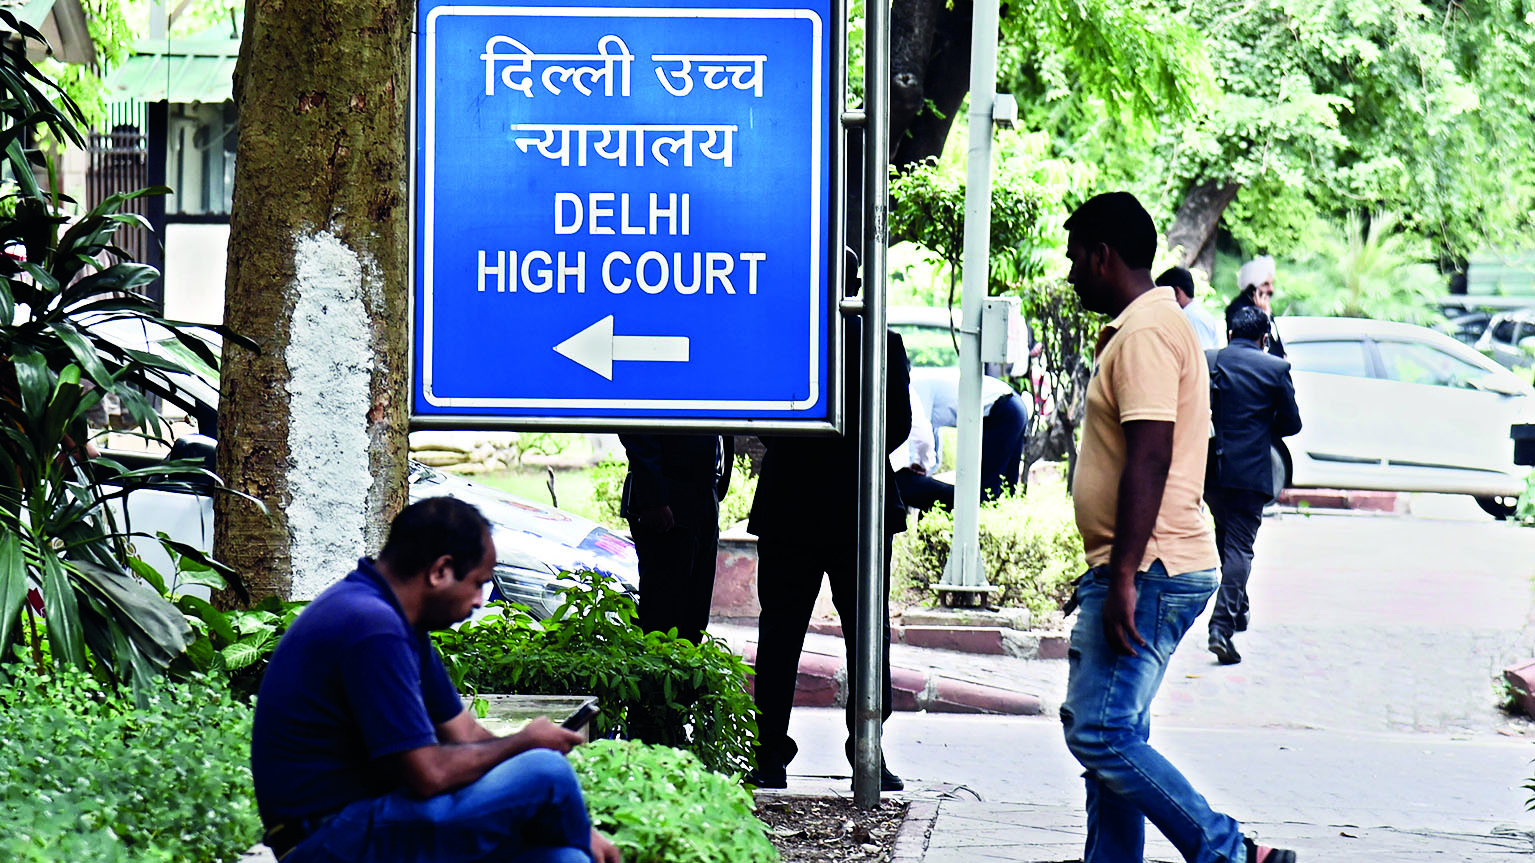 2 men convicted of decades-old murder acquitted by Delhi HC